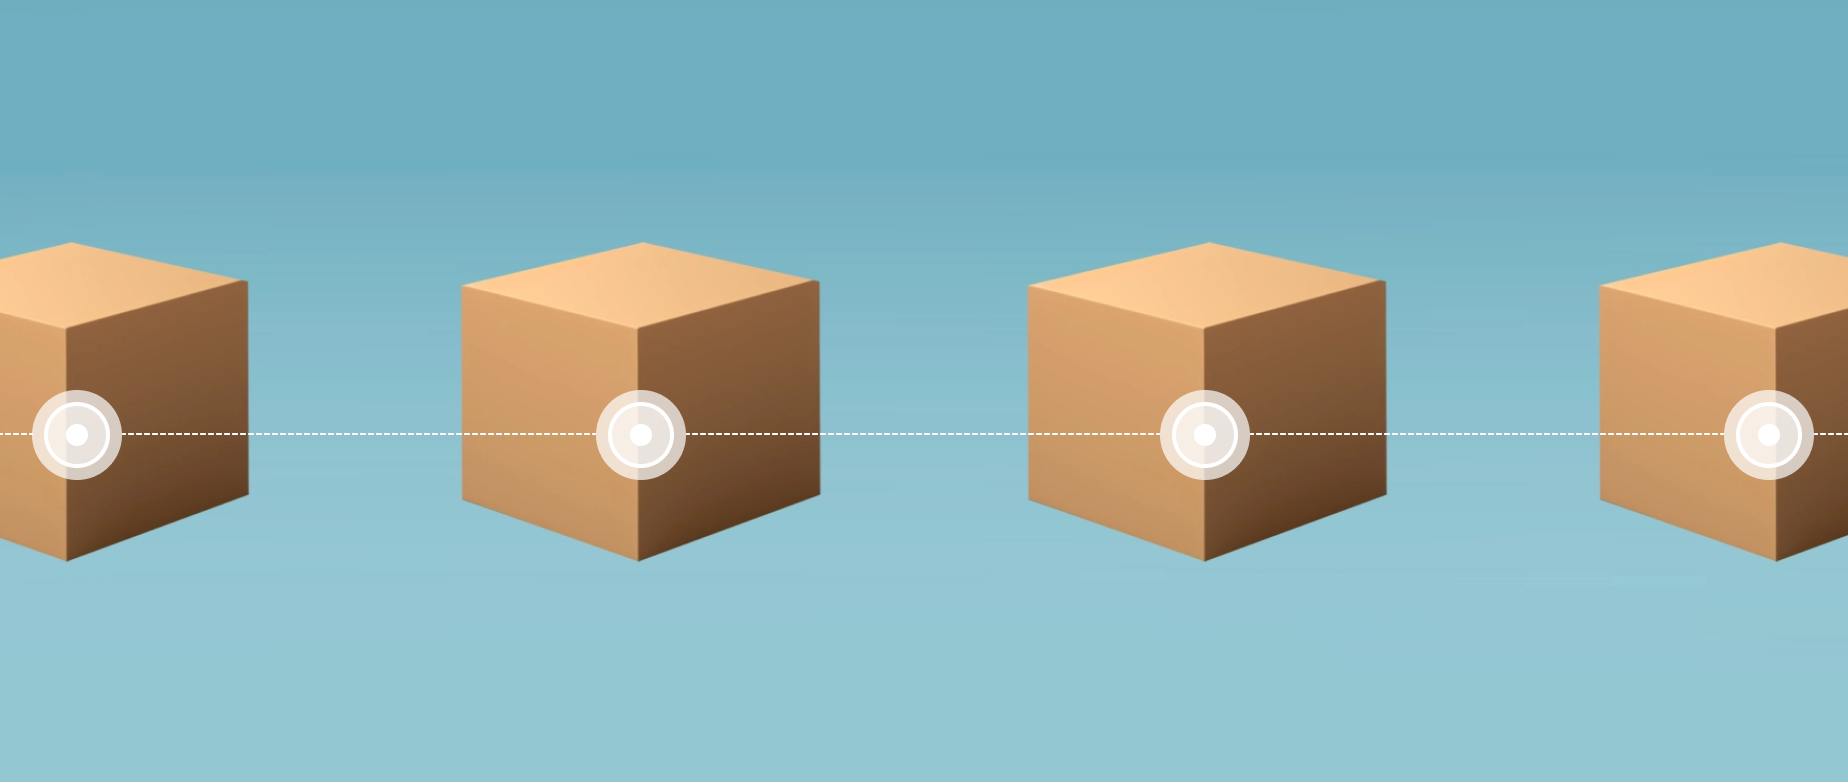 Four cardboard boxes next to each other with a dotted line running through their centers on a blue background.